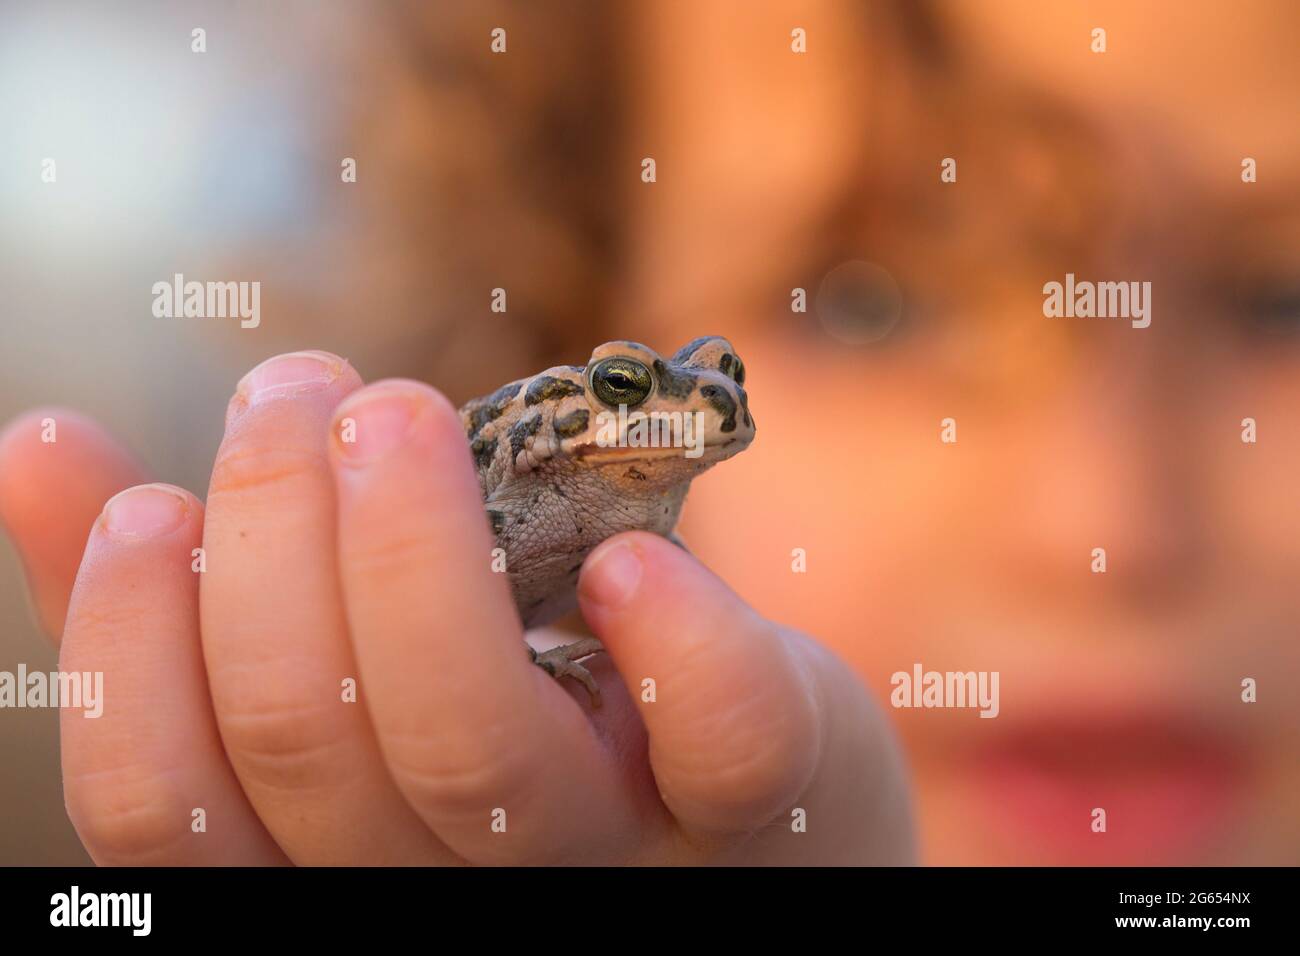 Holding a marsh frog Stock Photo